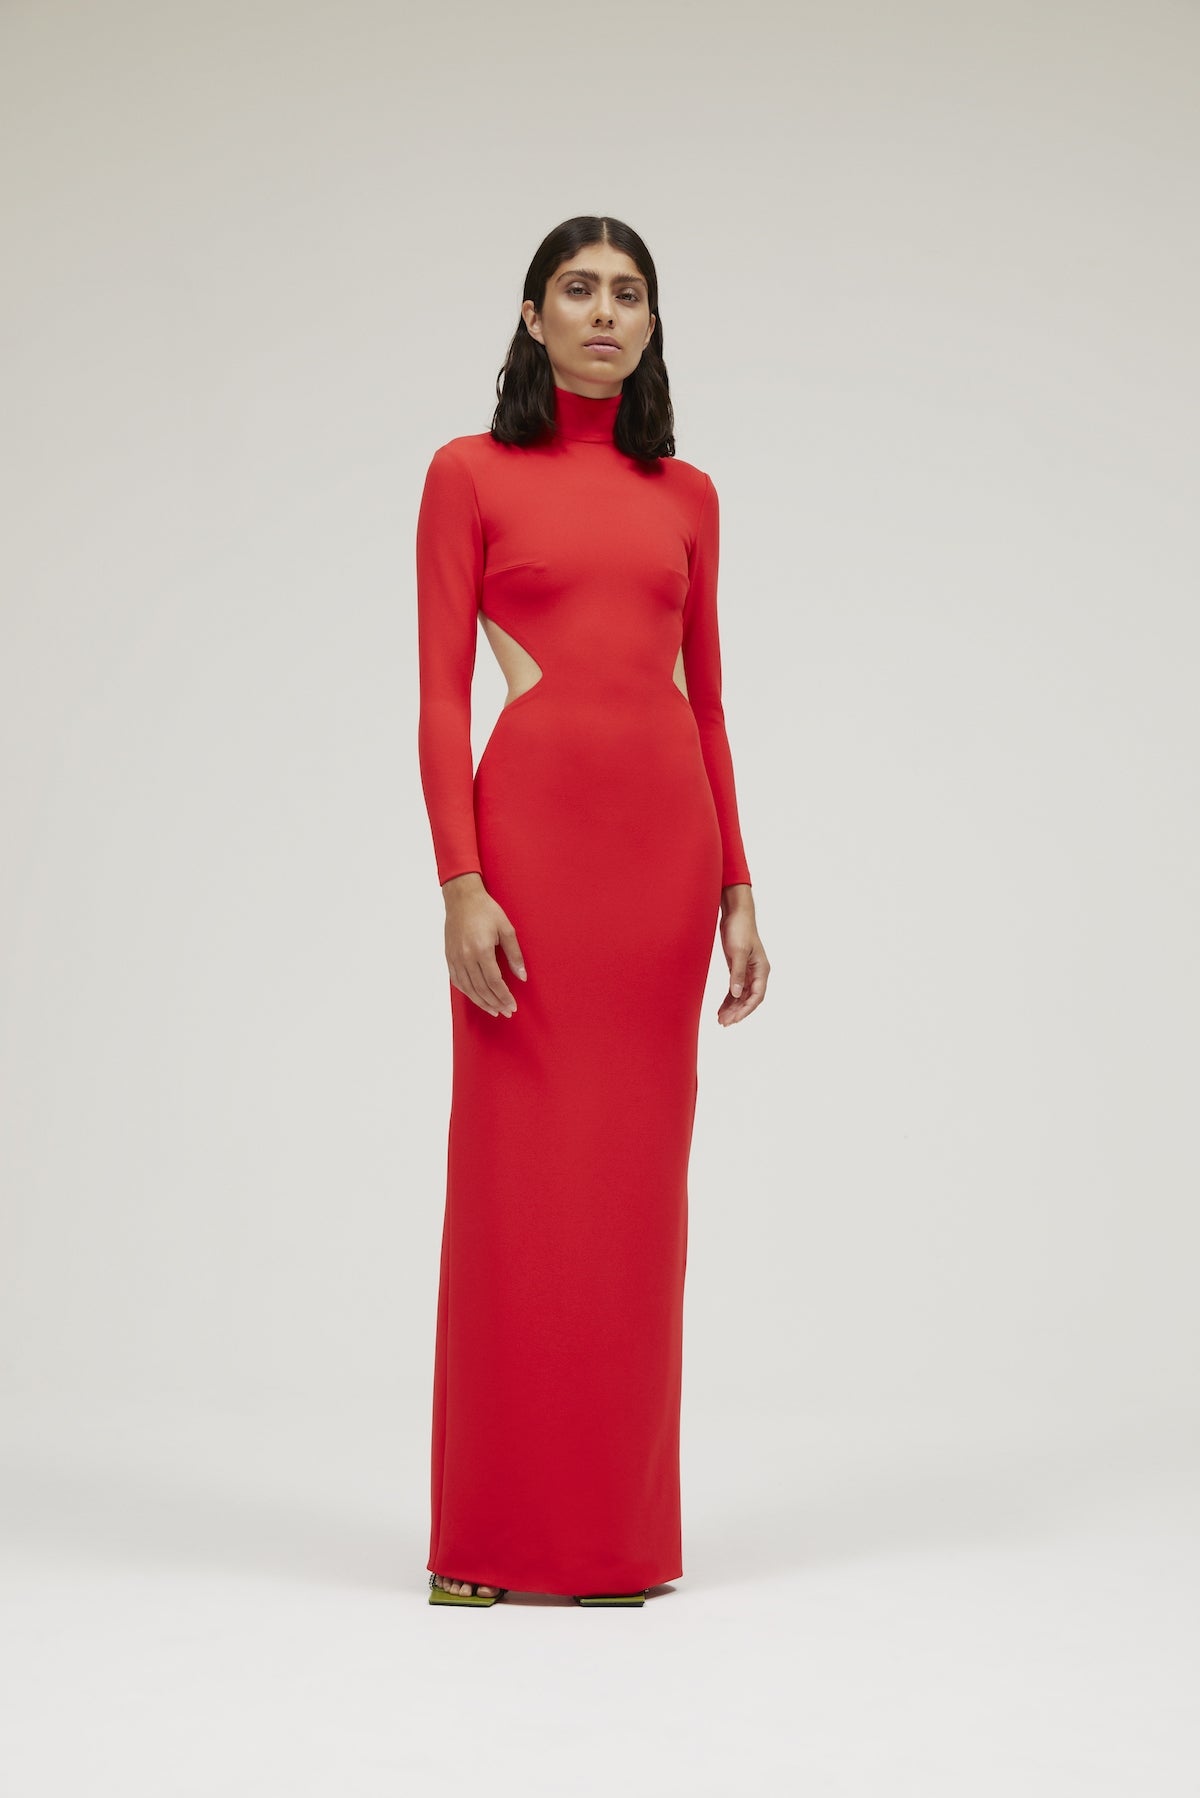 The Bougie Dress in True Red